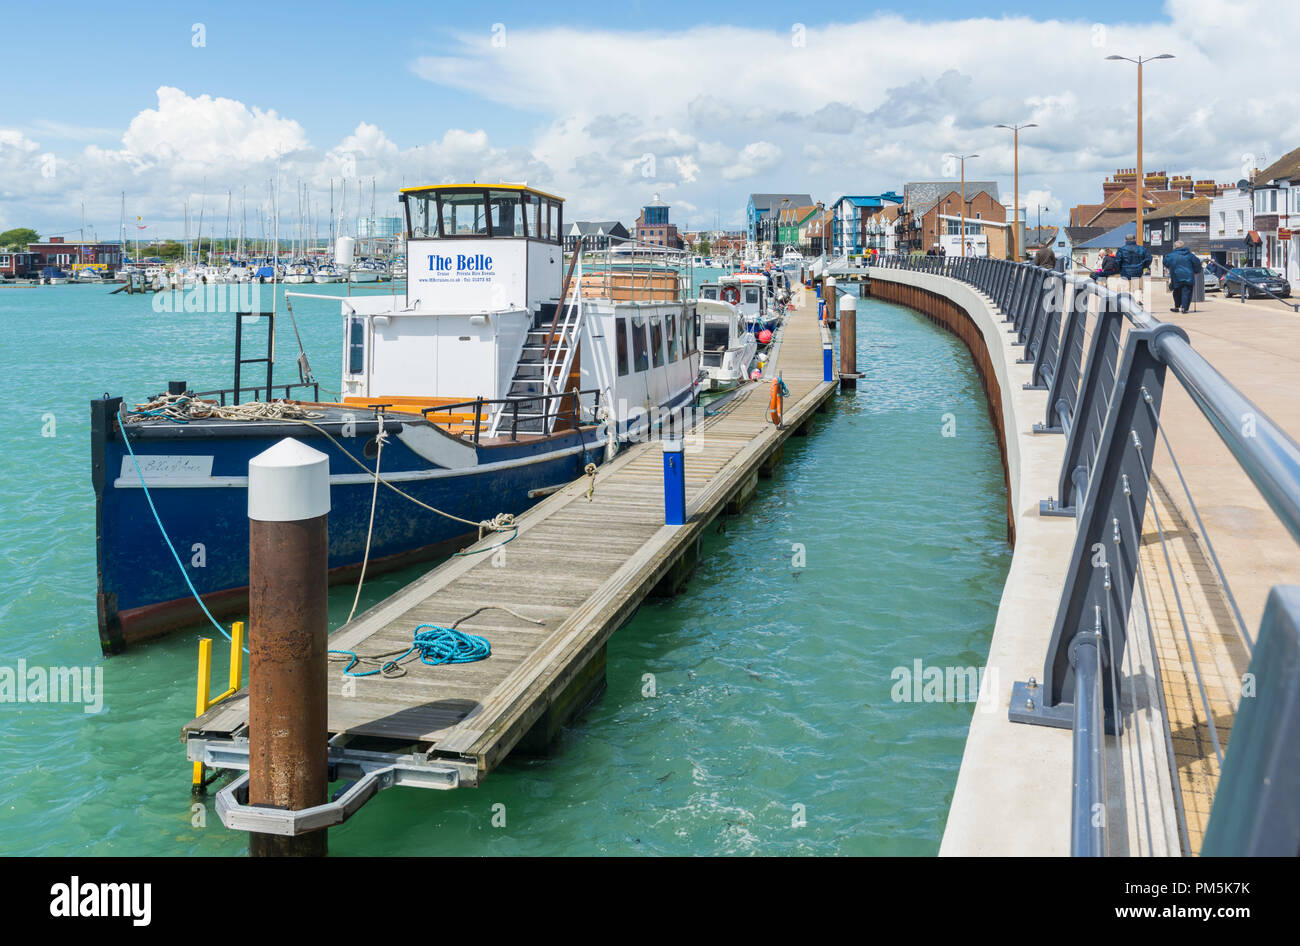 The Belle and other boats moored up on the River Arun at high tide in Spring in Littlehampton, West Sussex, England, UK. Stock Photo